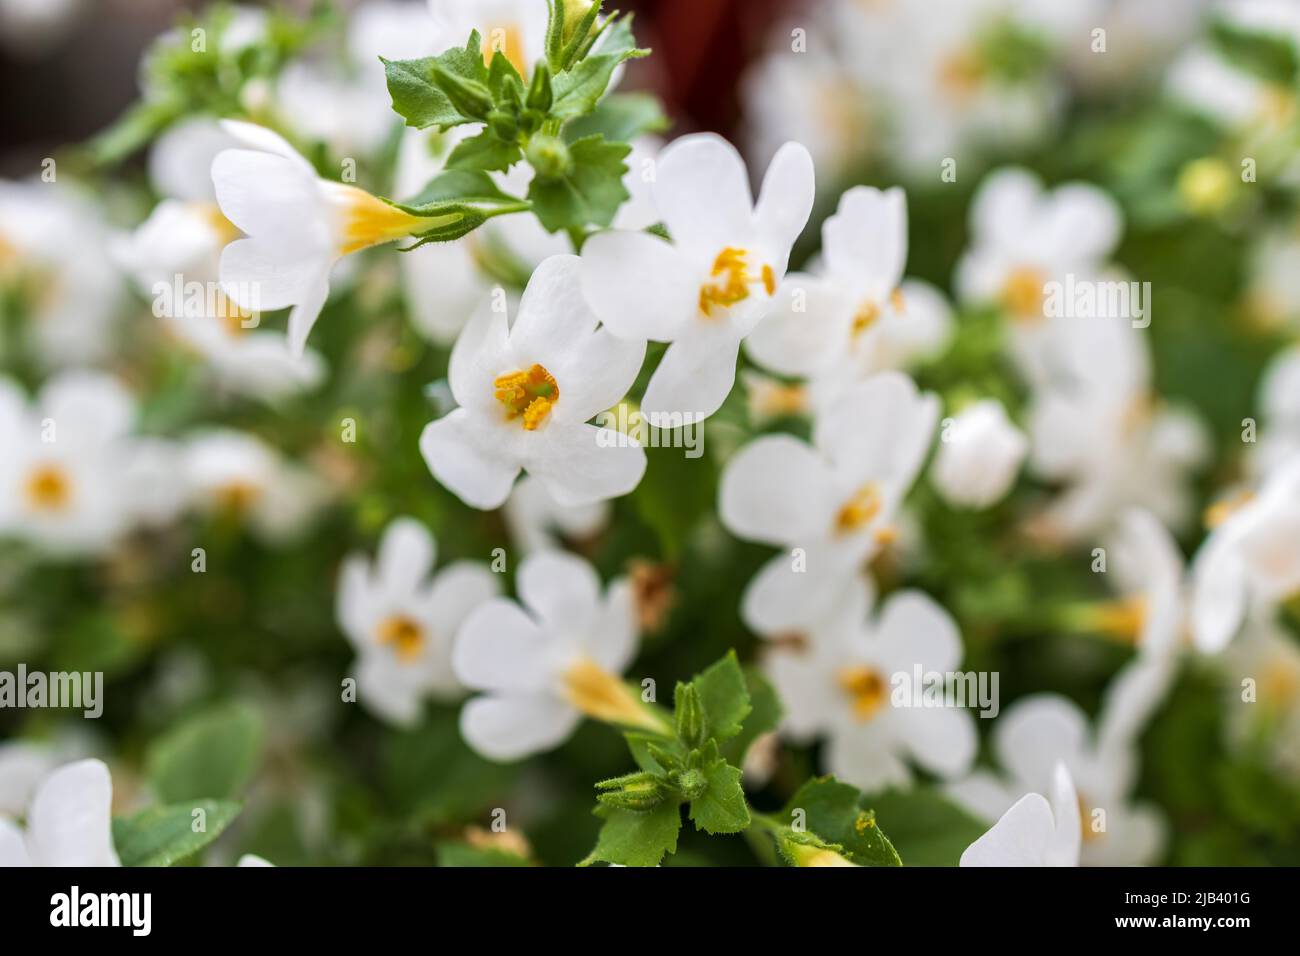 Ornamental bacopa flowers - Latin name - Chaenostoma cordatum. Bacopa monnieri, herb Bacopa is a medicinal herb used in Ayurveda, also known as Brahmi Stock Photo